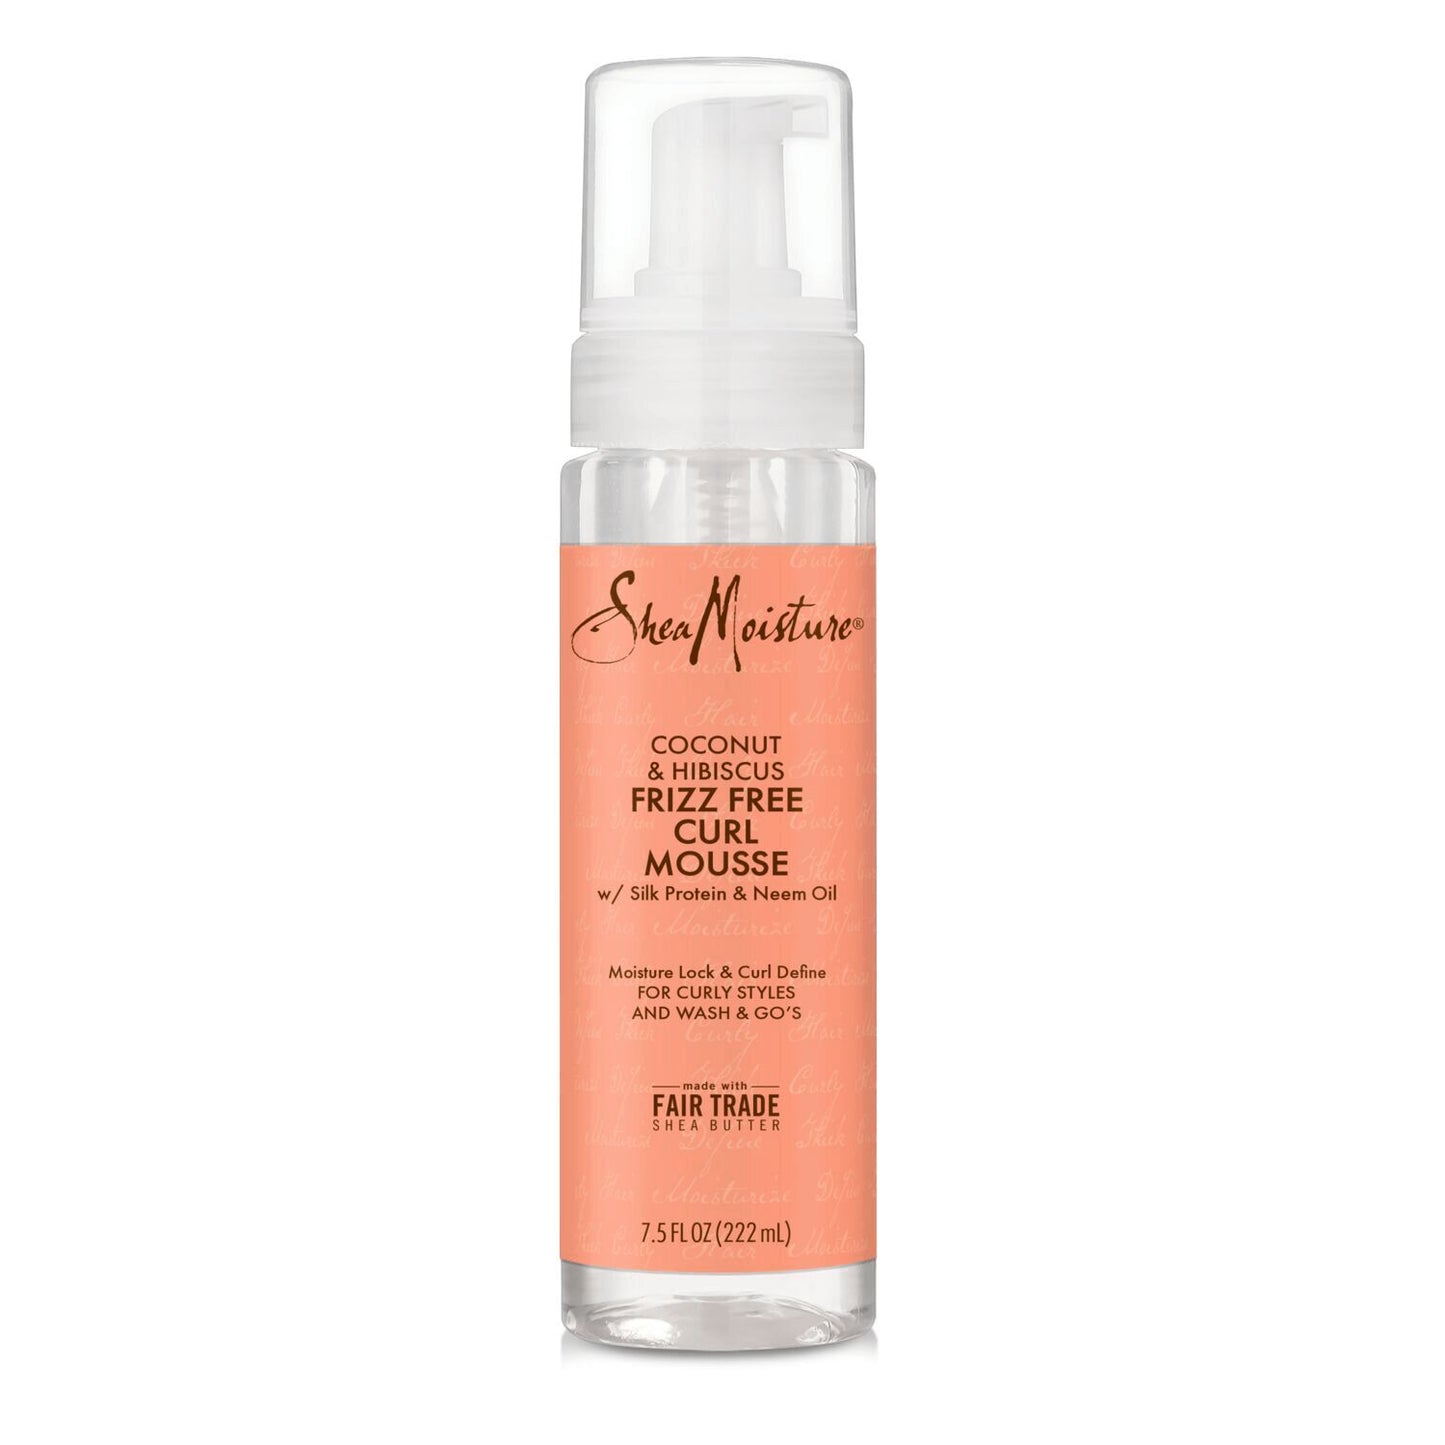 SheaMoisture - Frizz Free - Coconut & Hibiscus Curl Mousse - 222ml